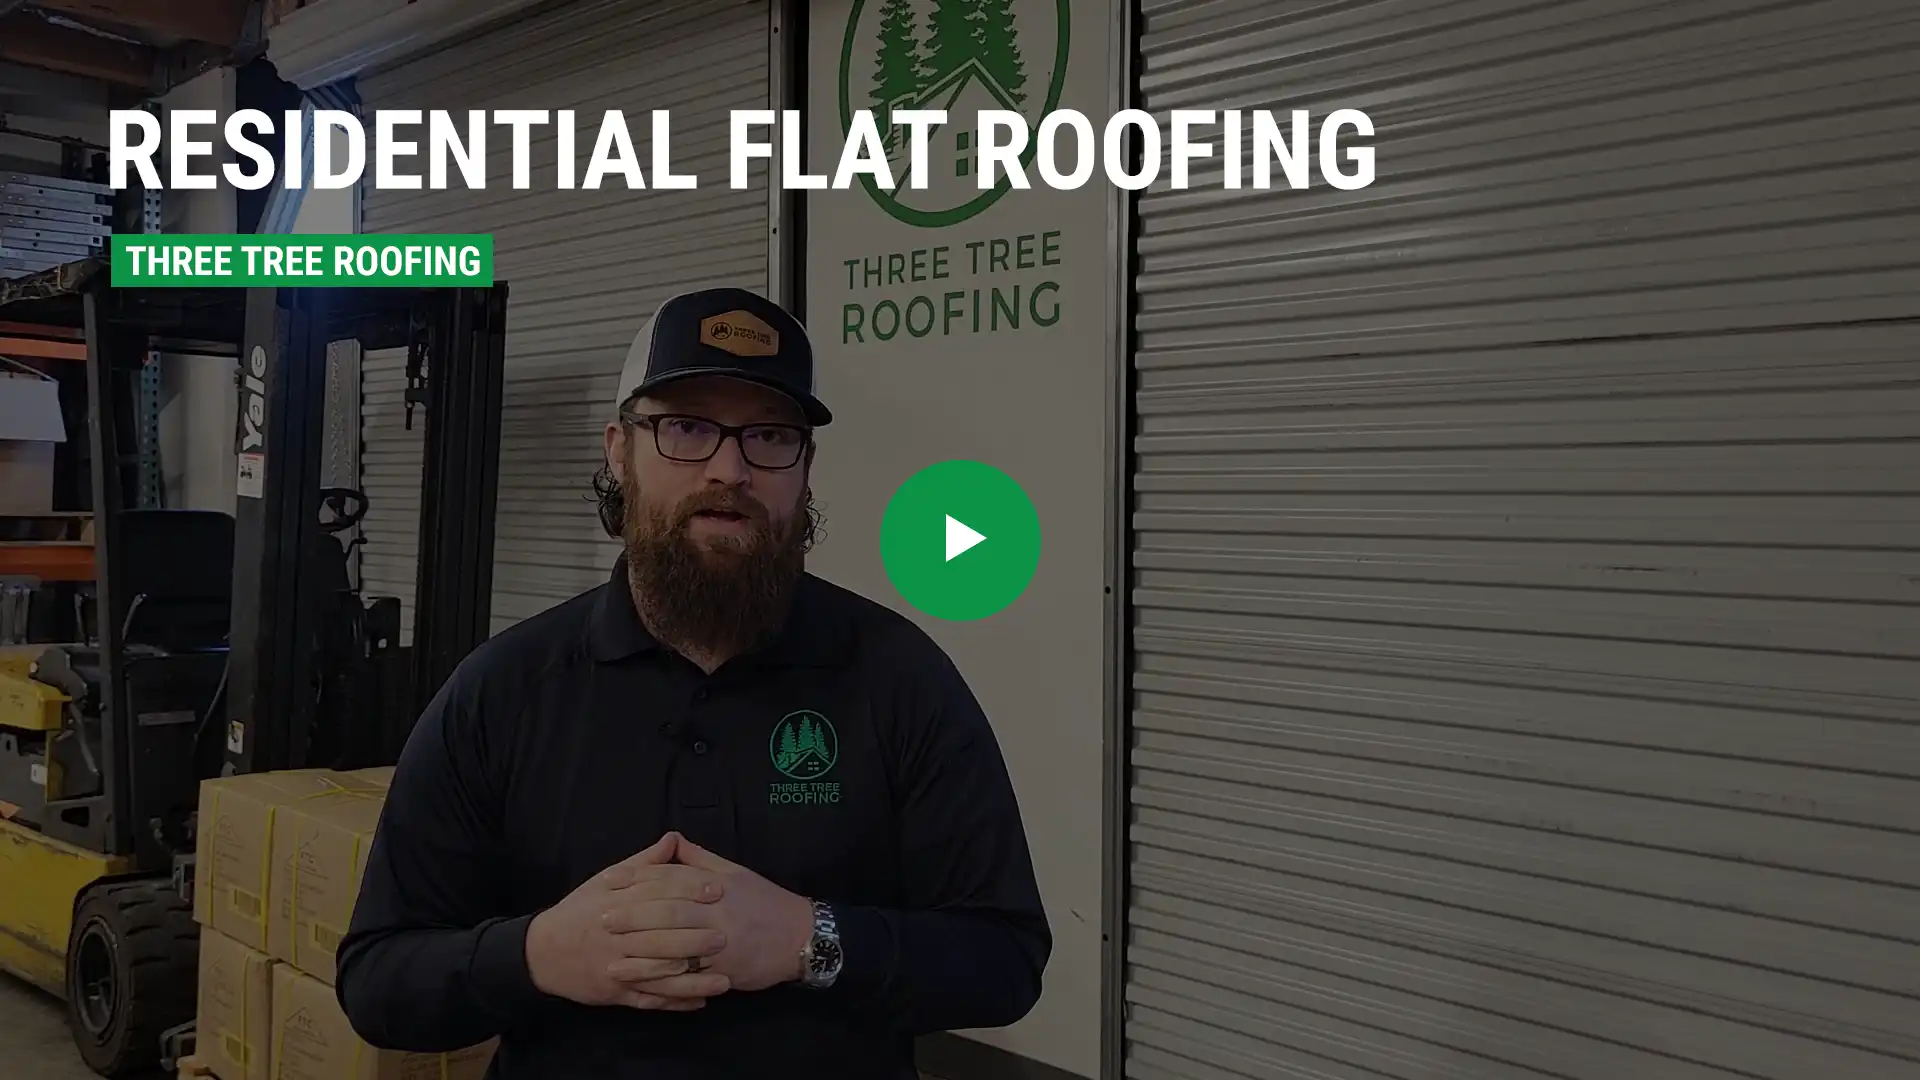 Flat Roofing - Roofing Video